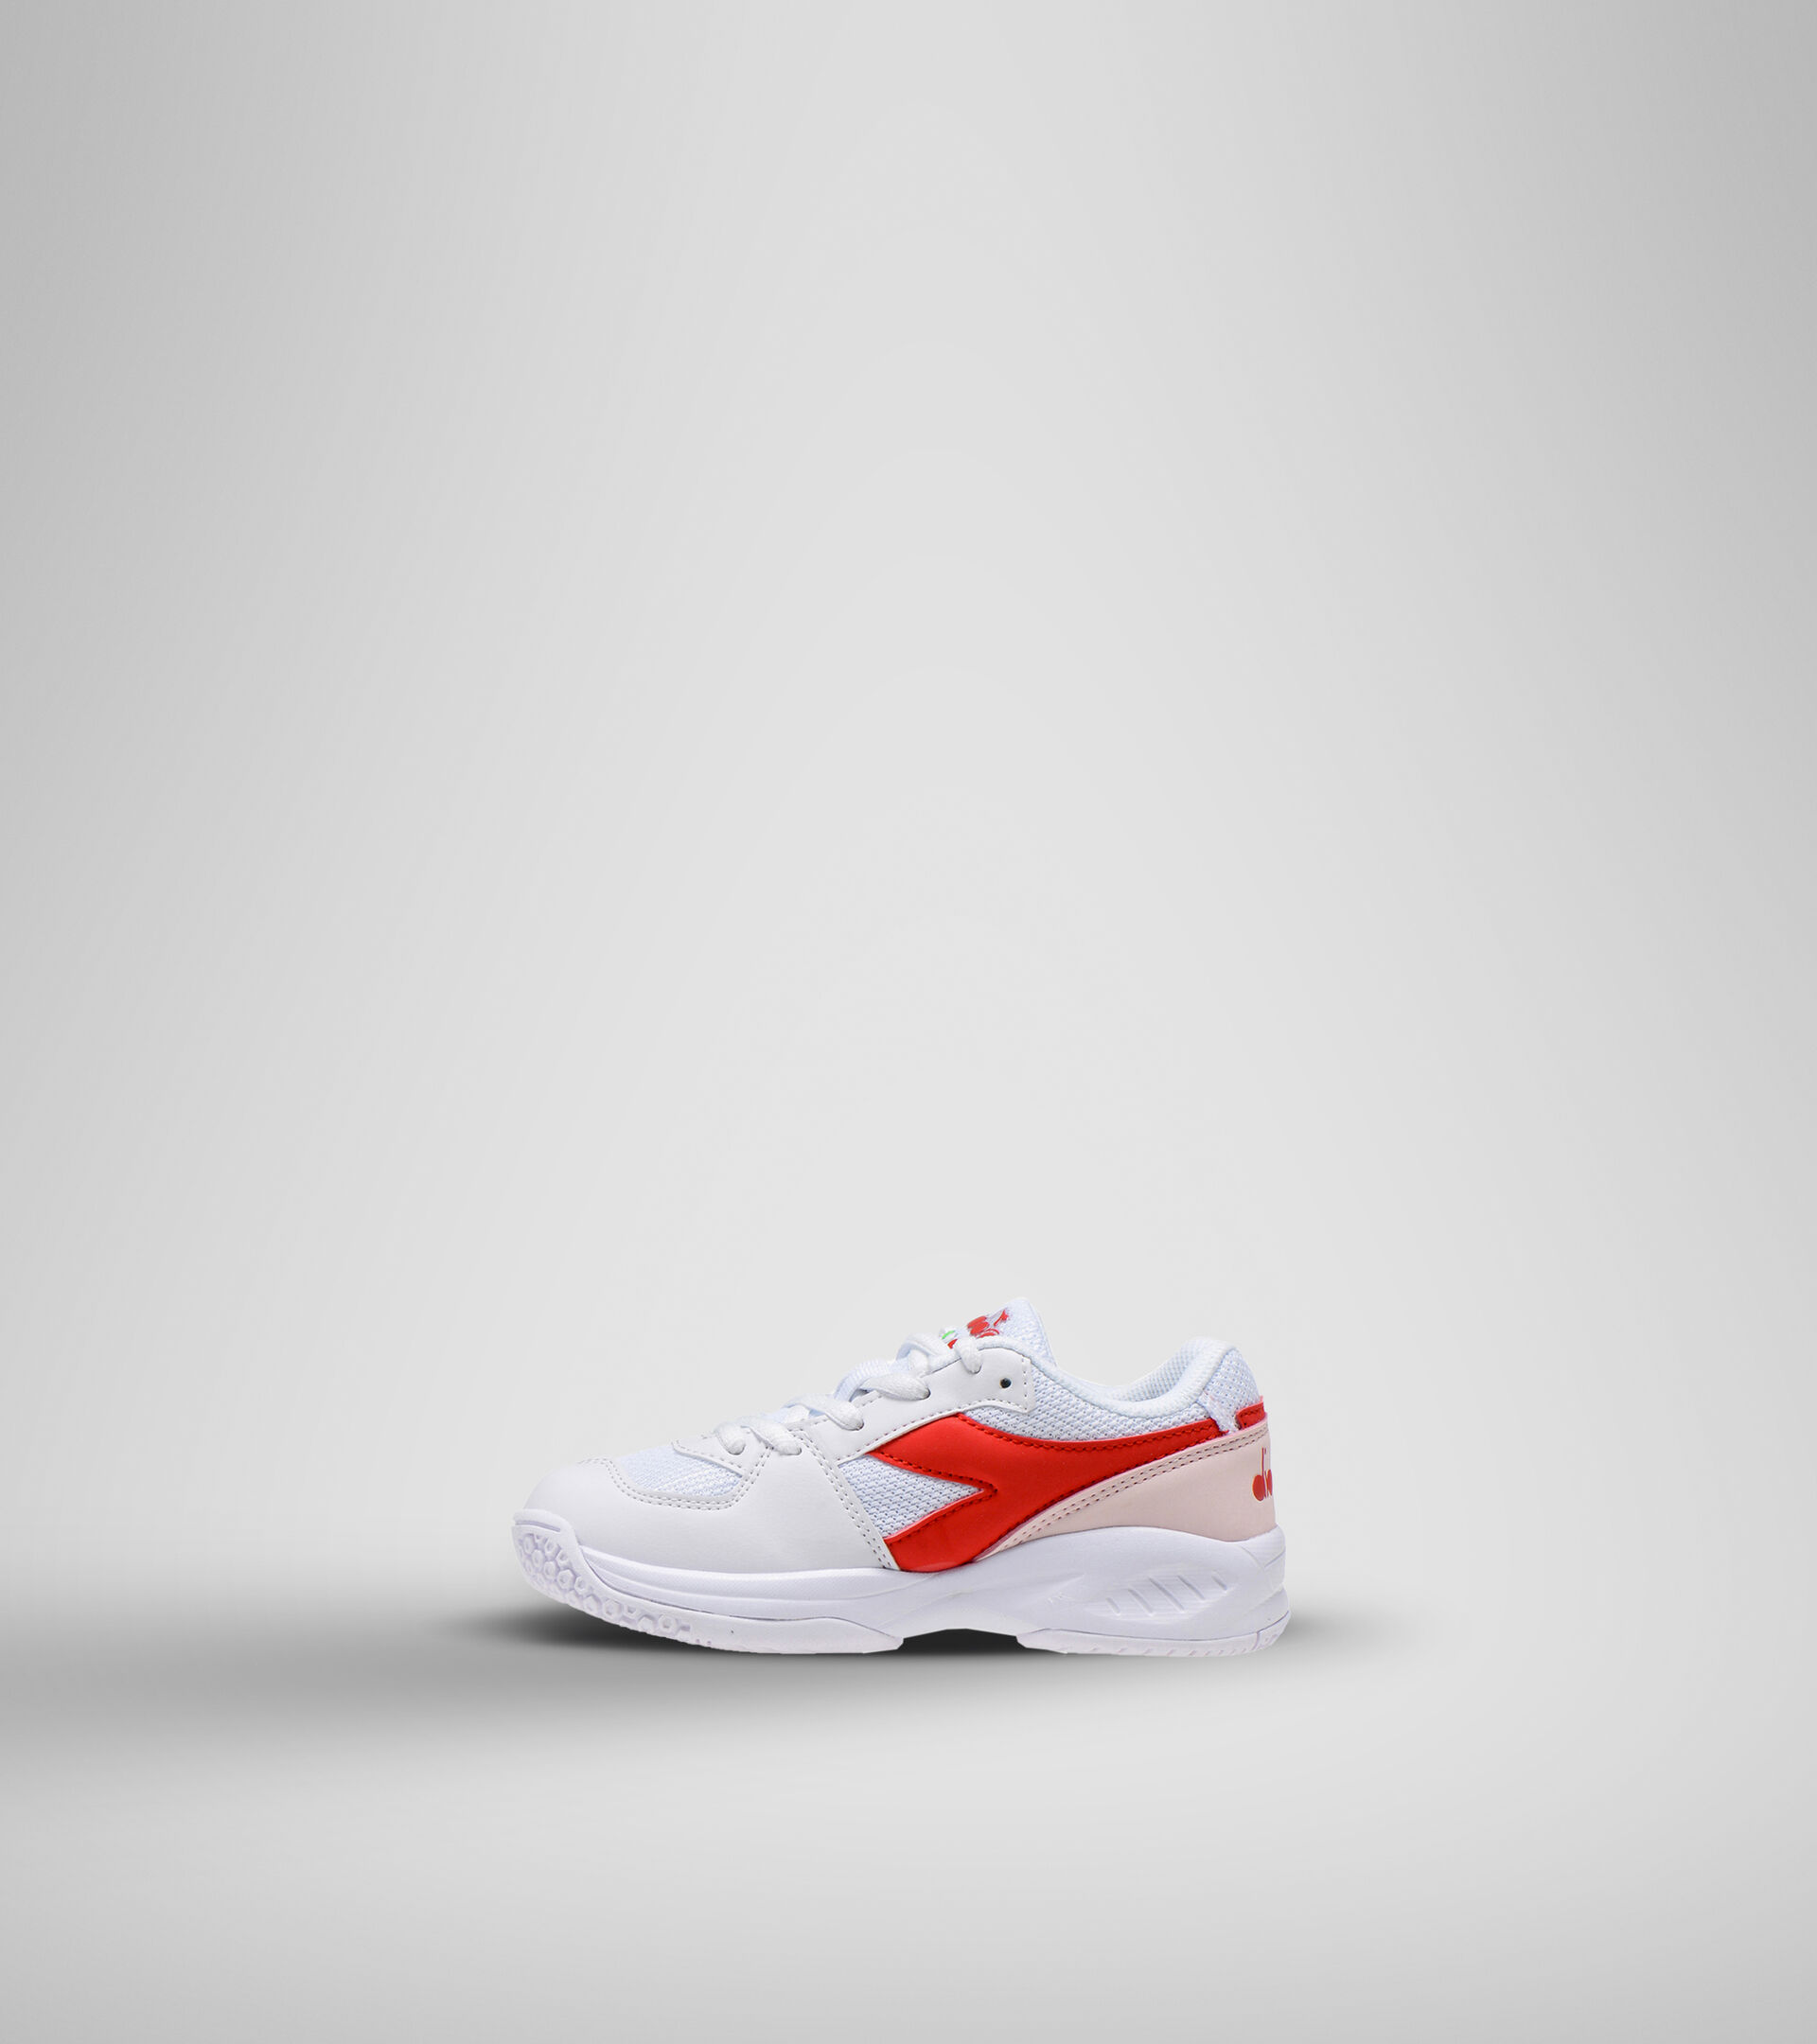 Clay and hard court tennis shoe - Unisex kids S. CHALLENGE 3 JR WHITE/LIVELY HIBISCUS RED - Diadora